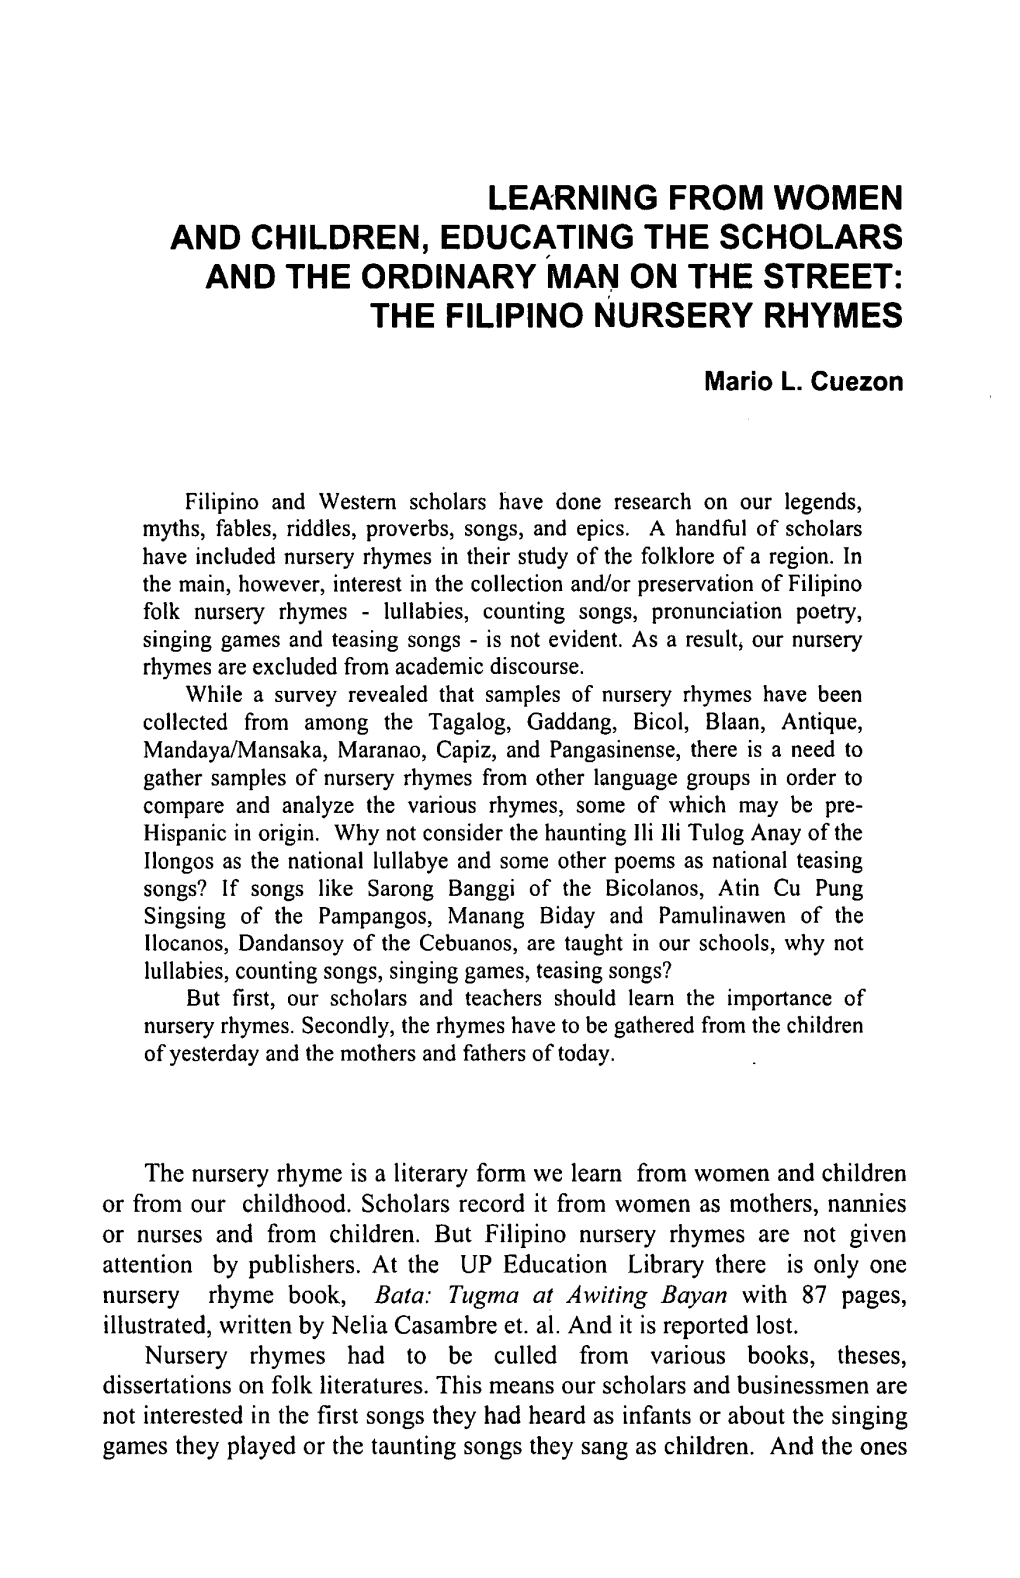 Learning from Women and Children, Educ~Ting the Scholars and the Ordinary Man on the Street: the Filipino Nursery Rhymes